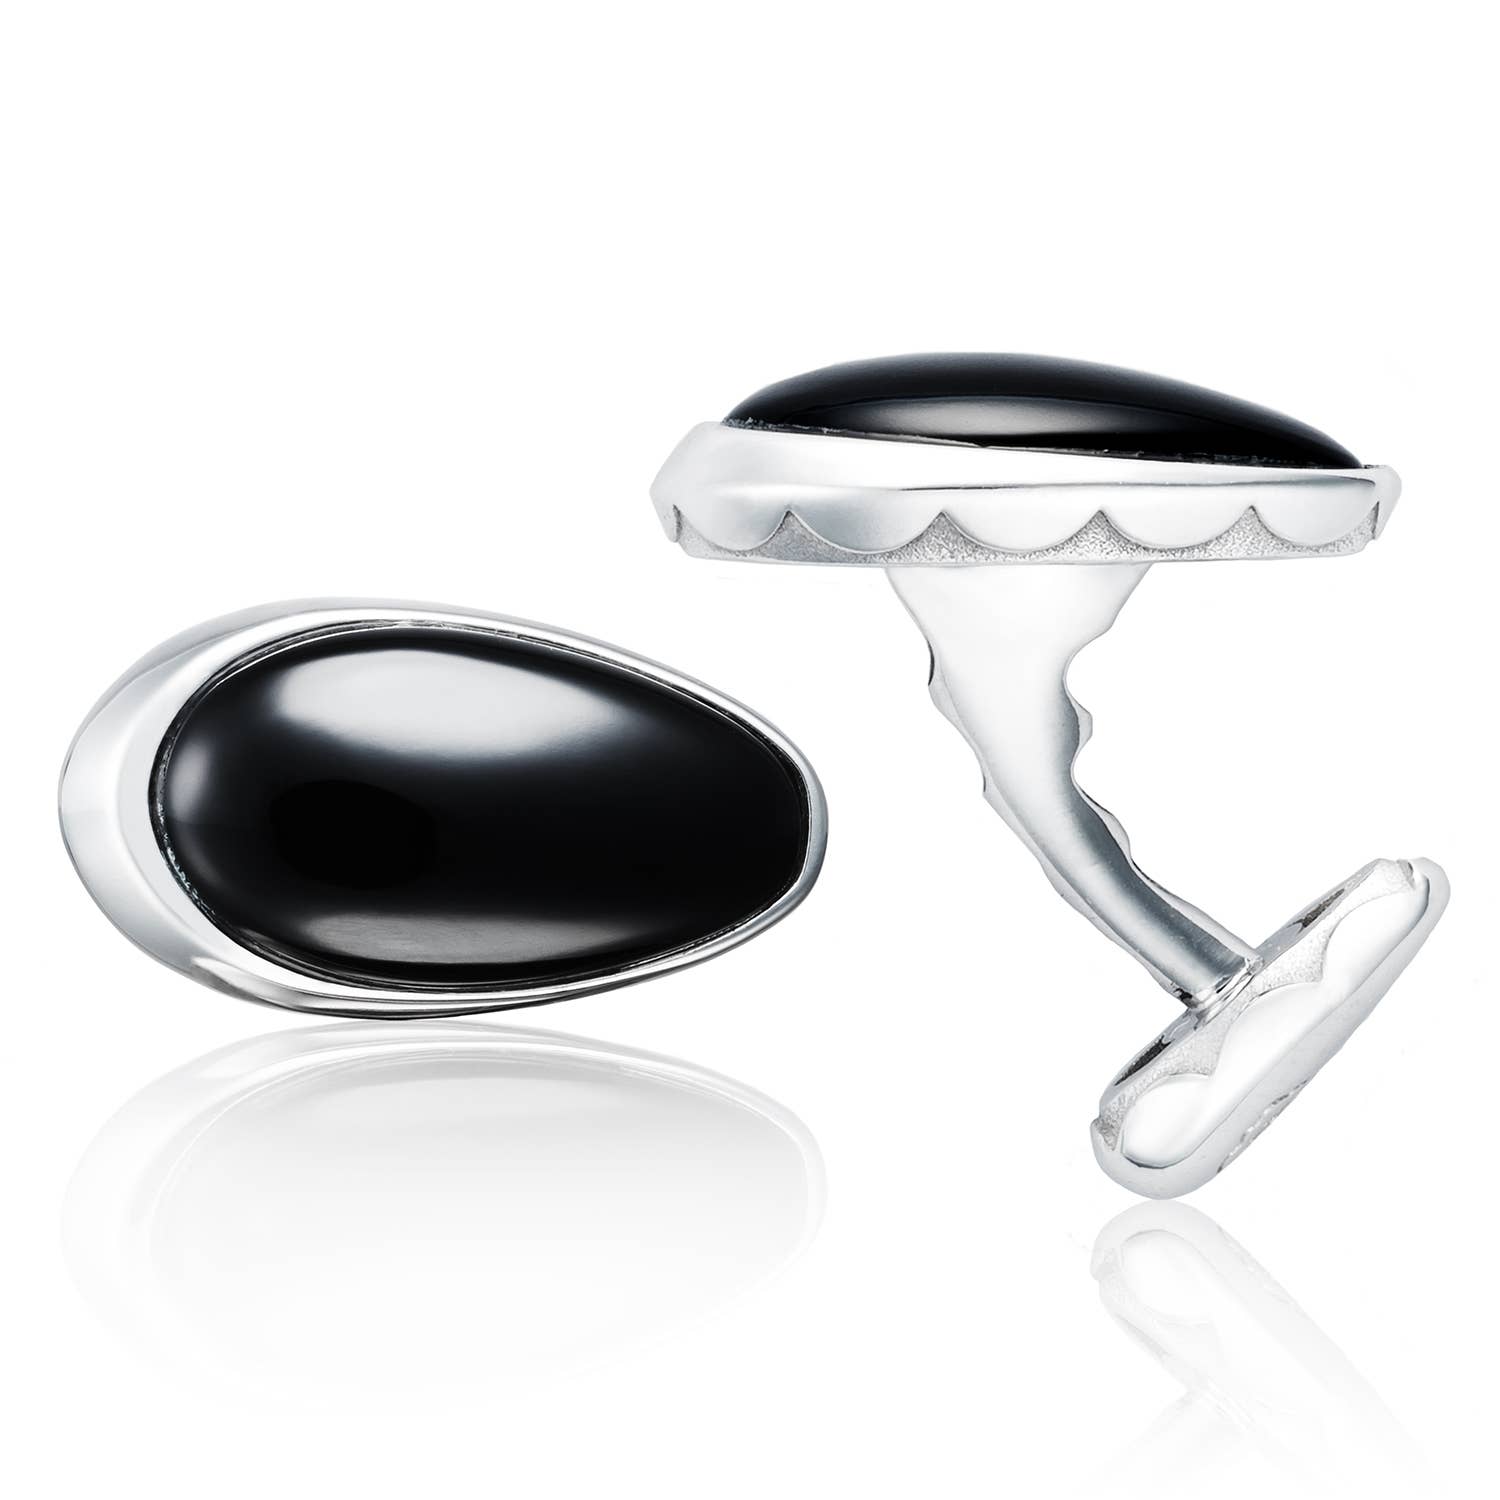 Cabochon Vented Cuff Links featuring Black Onyx